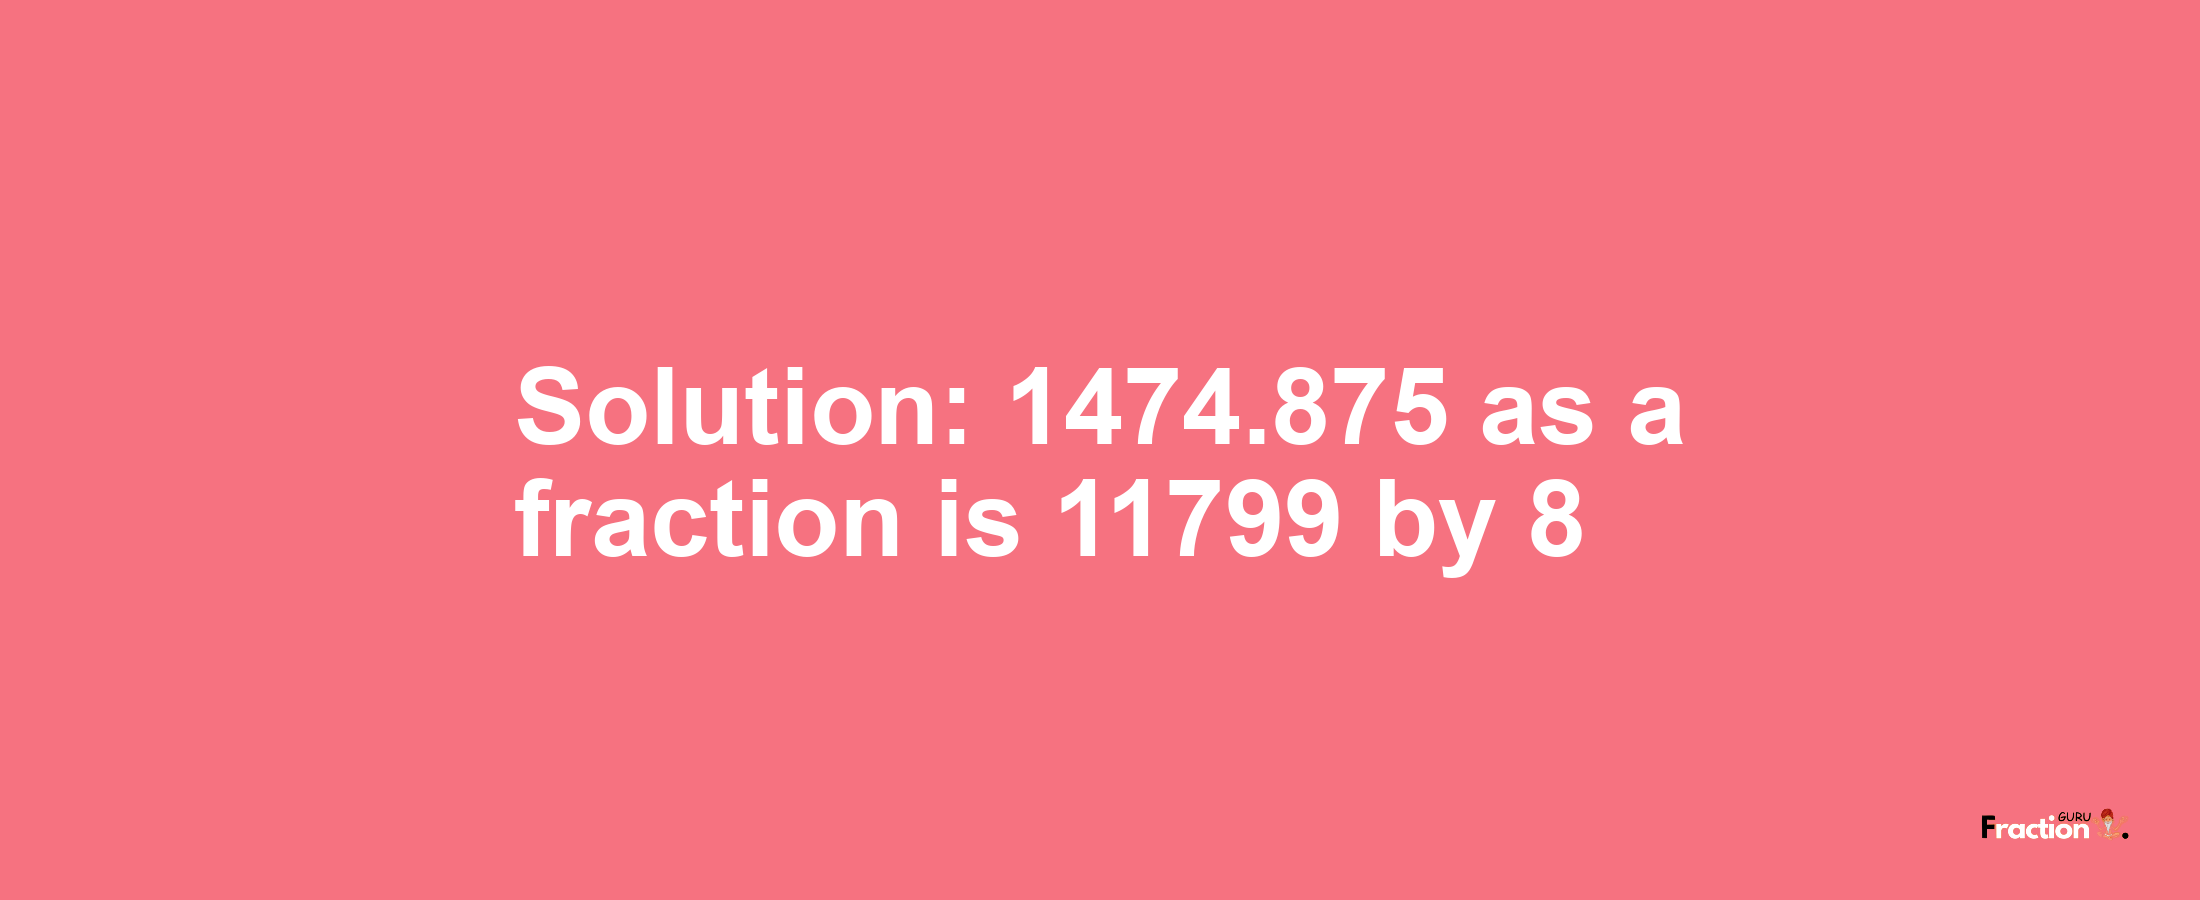 Solution:1474.875 as a fraction is 11799/8